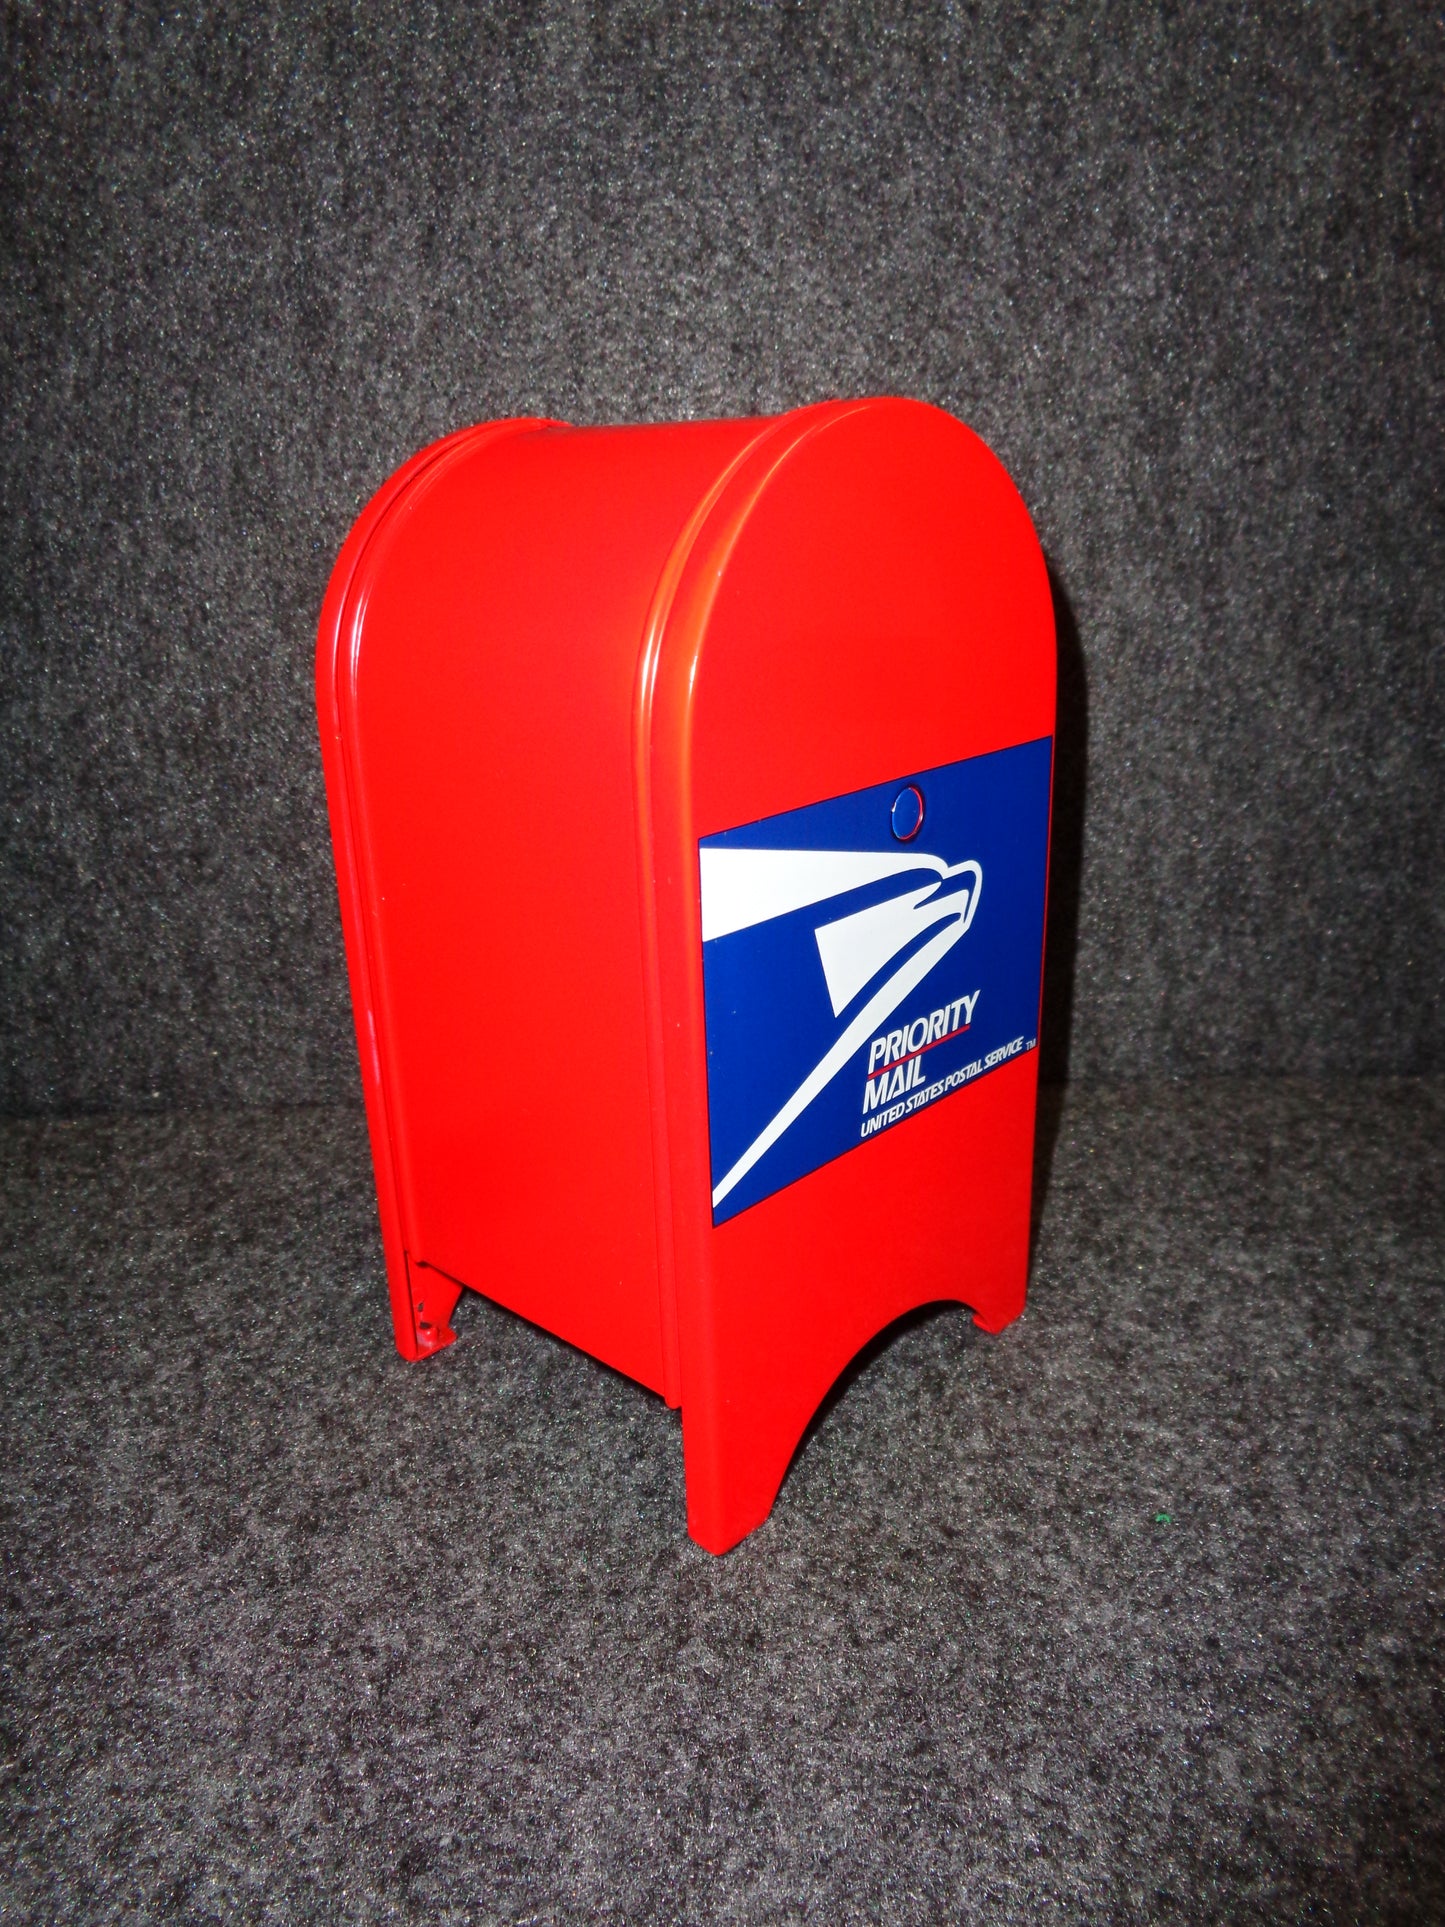 U.S. Mail Priority Mailbox Coin Bank Replica - Red